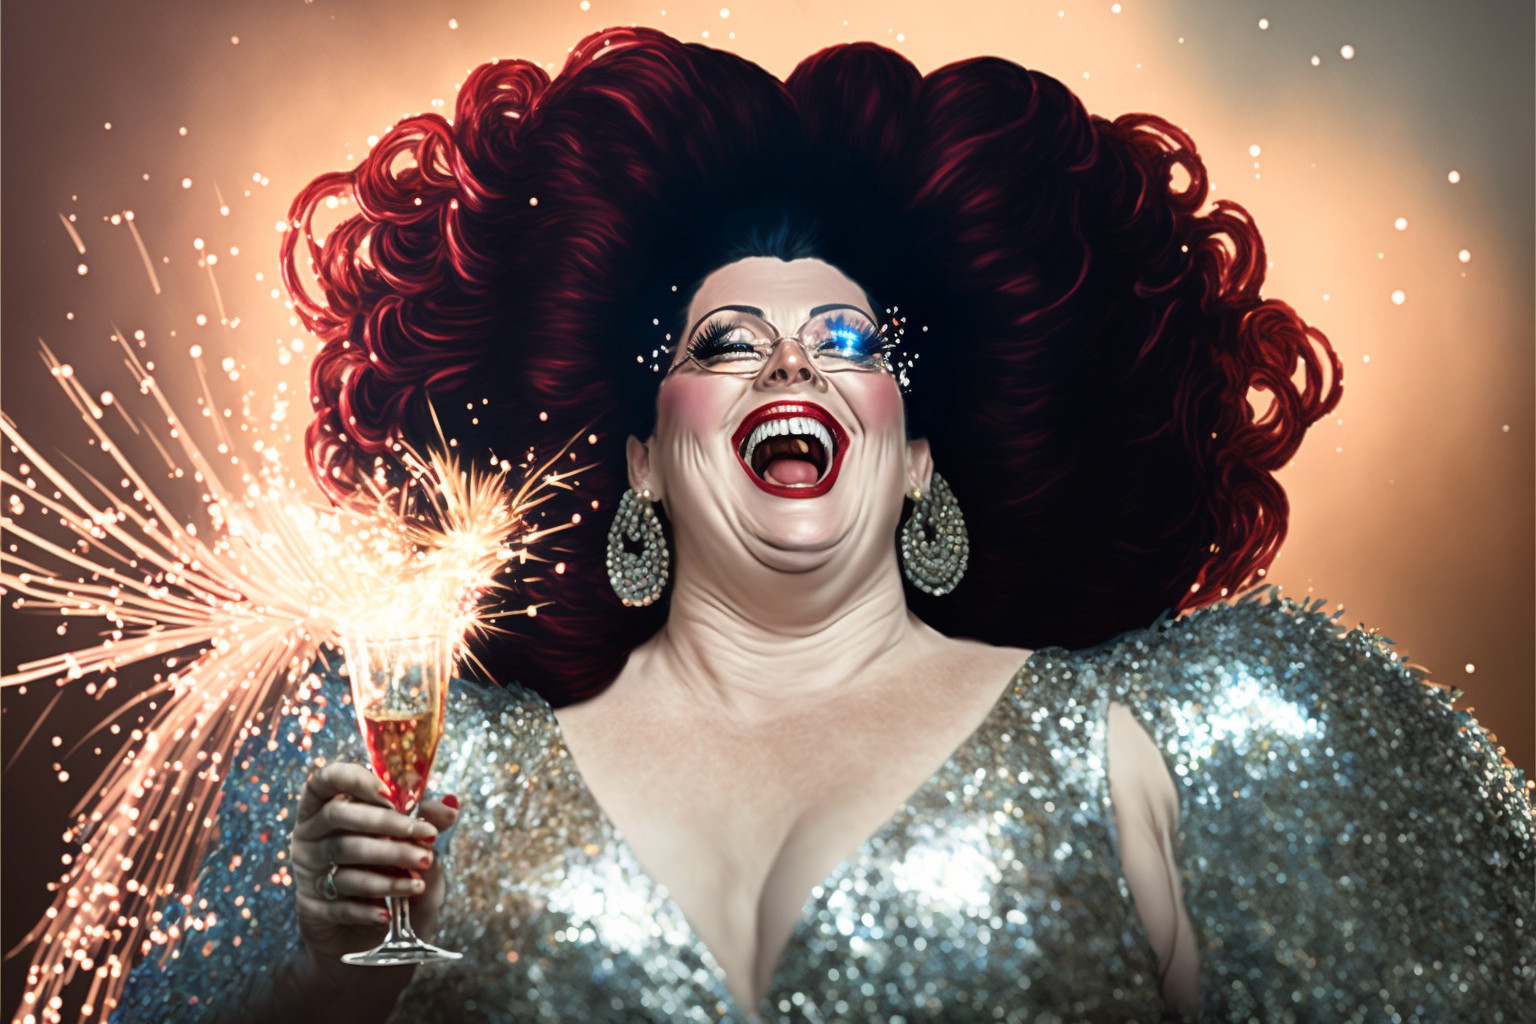 drag queen smiling, laughing, with huge hair with champagne flute Infront of fireworks